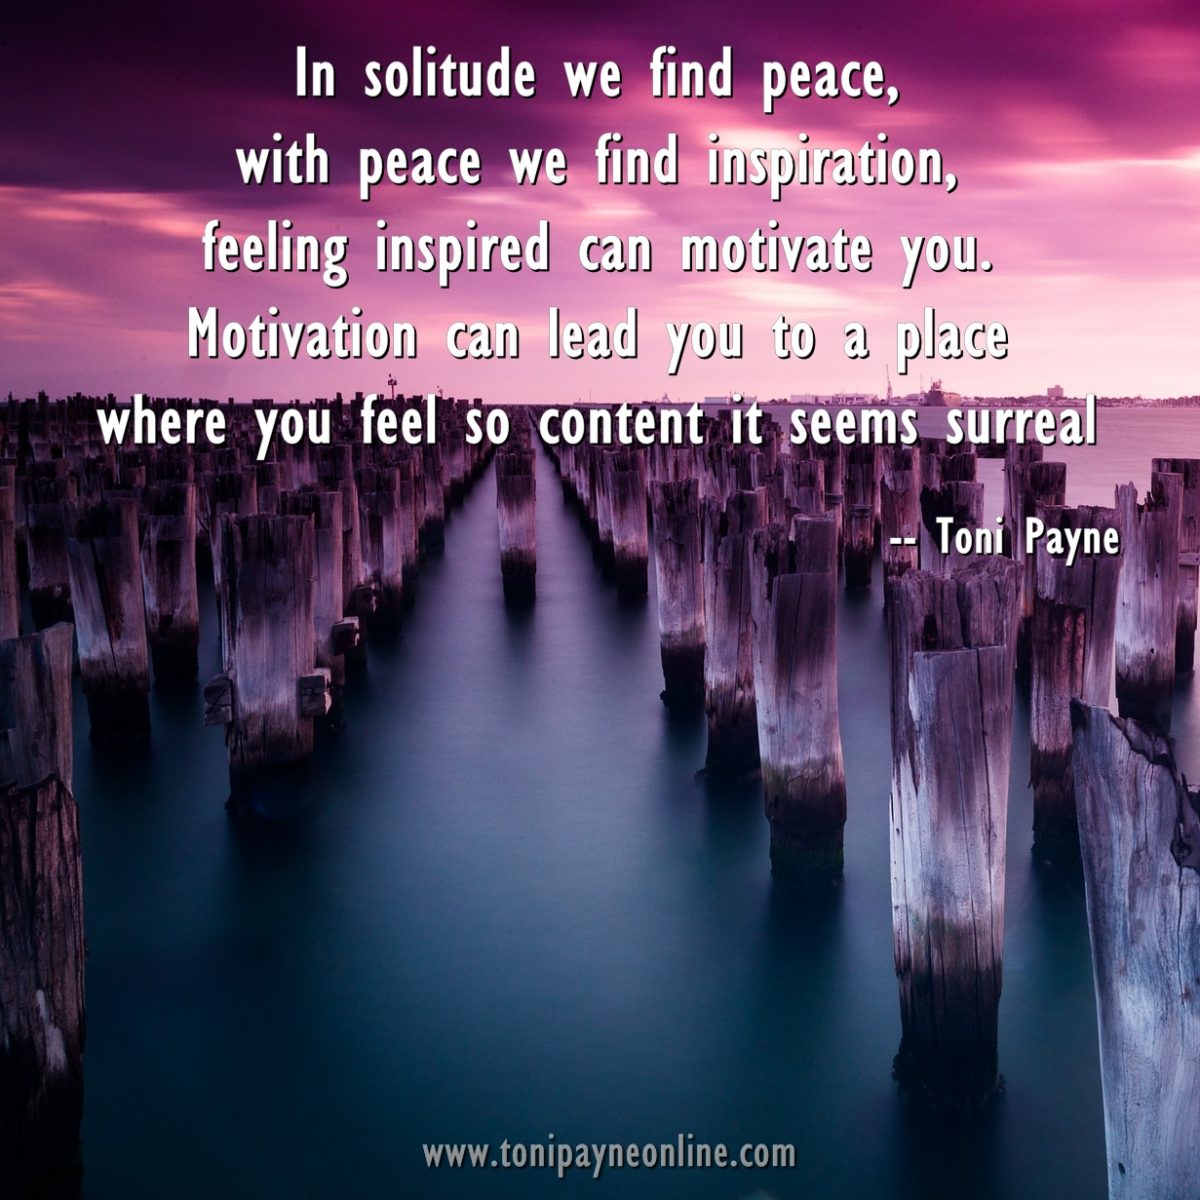 Quote About Peace Solitude Inspiration In Solitude We Find Peace